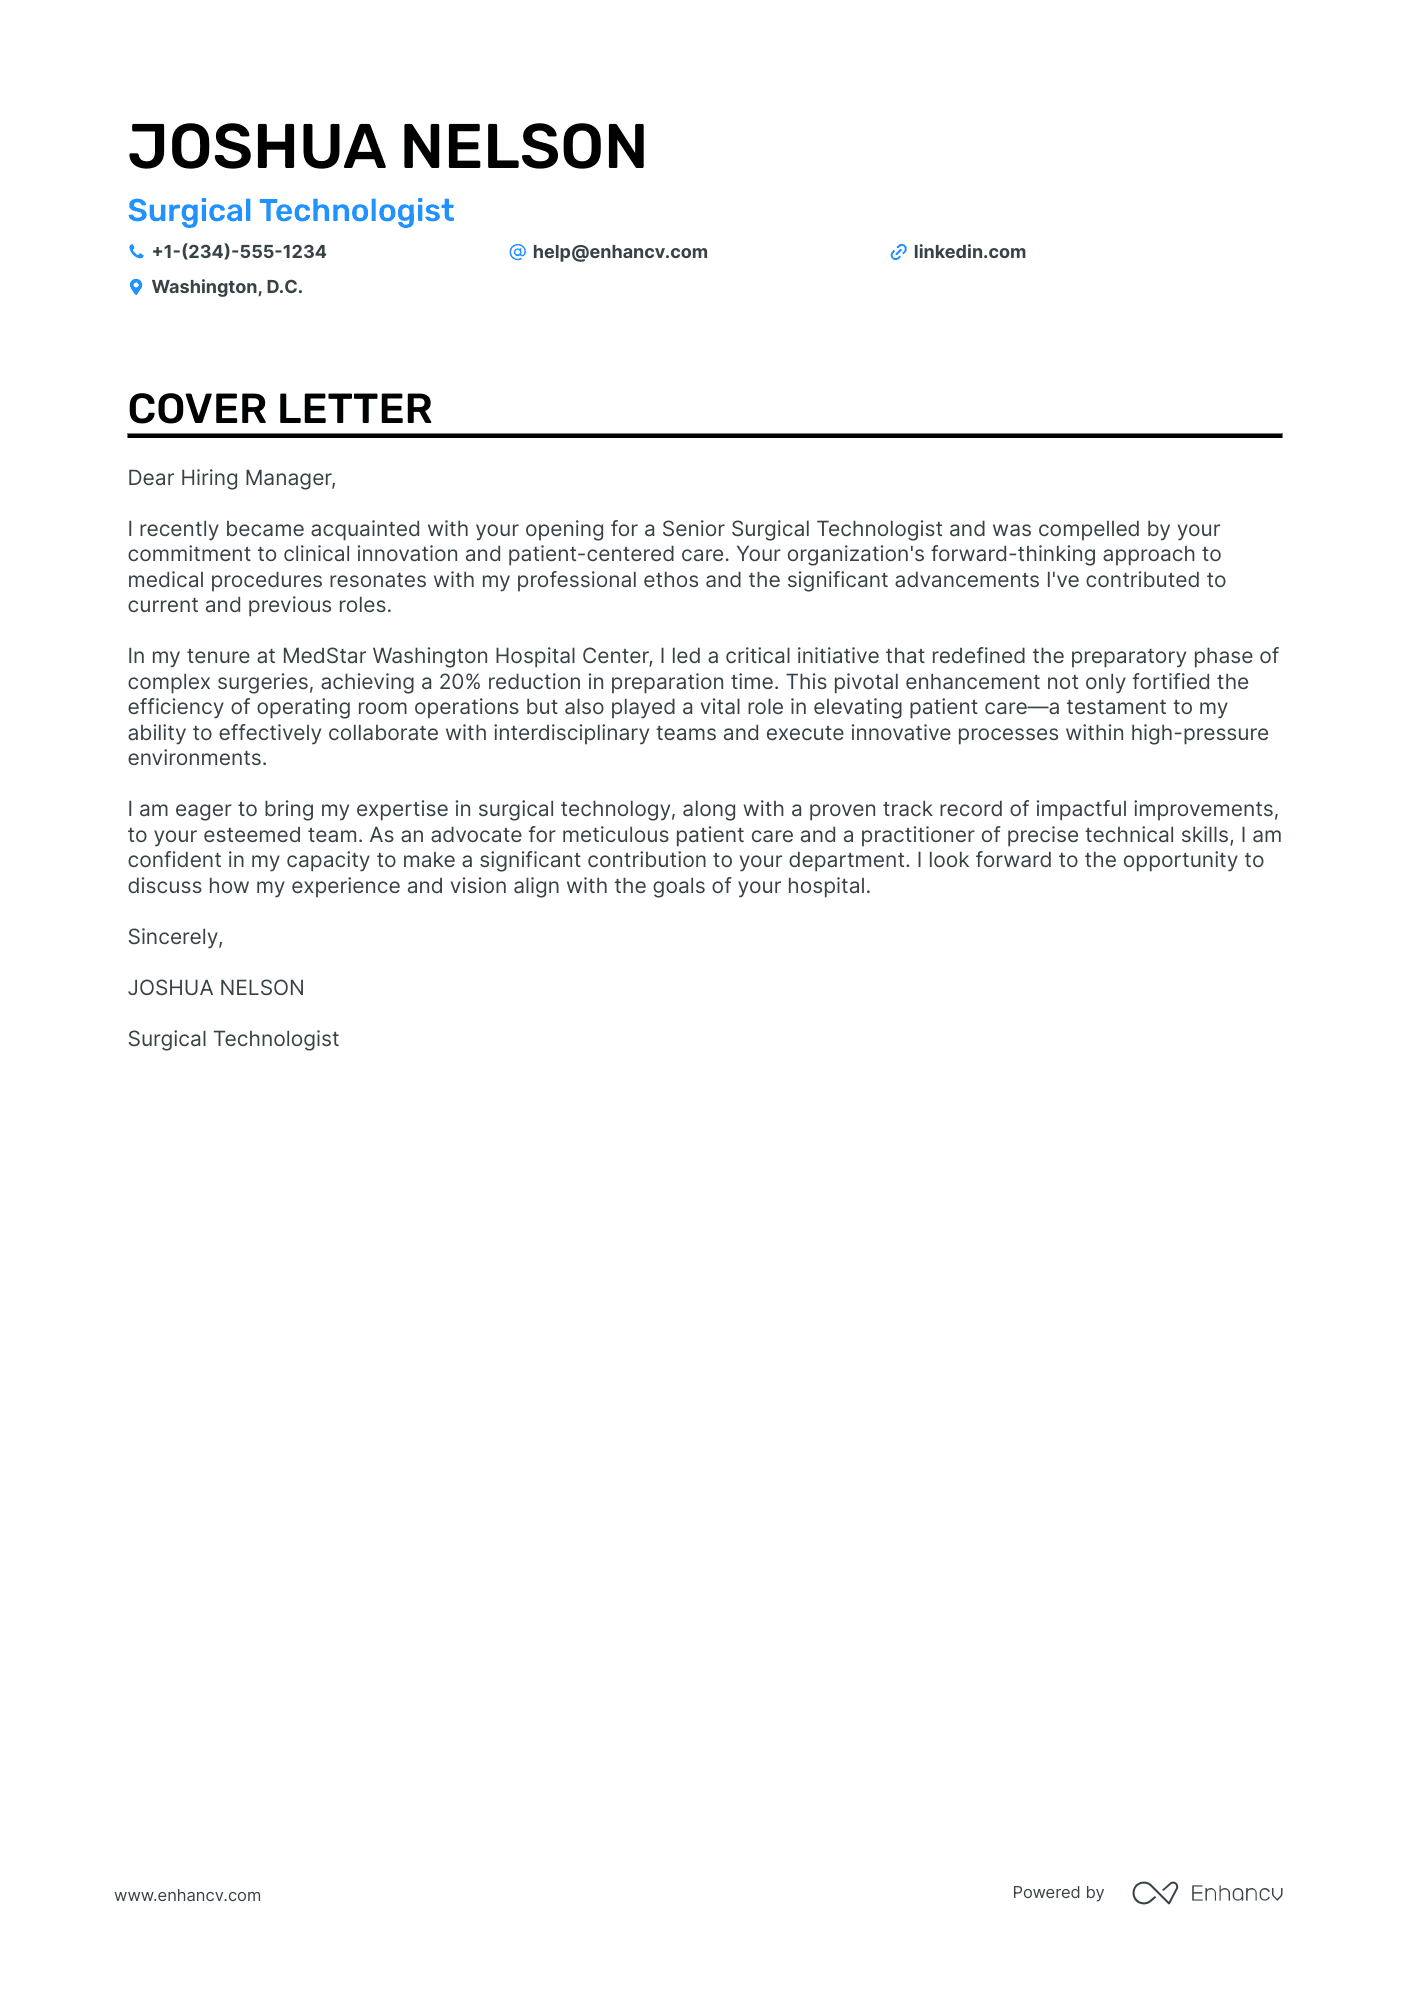 Surgical Tech cover letter